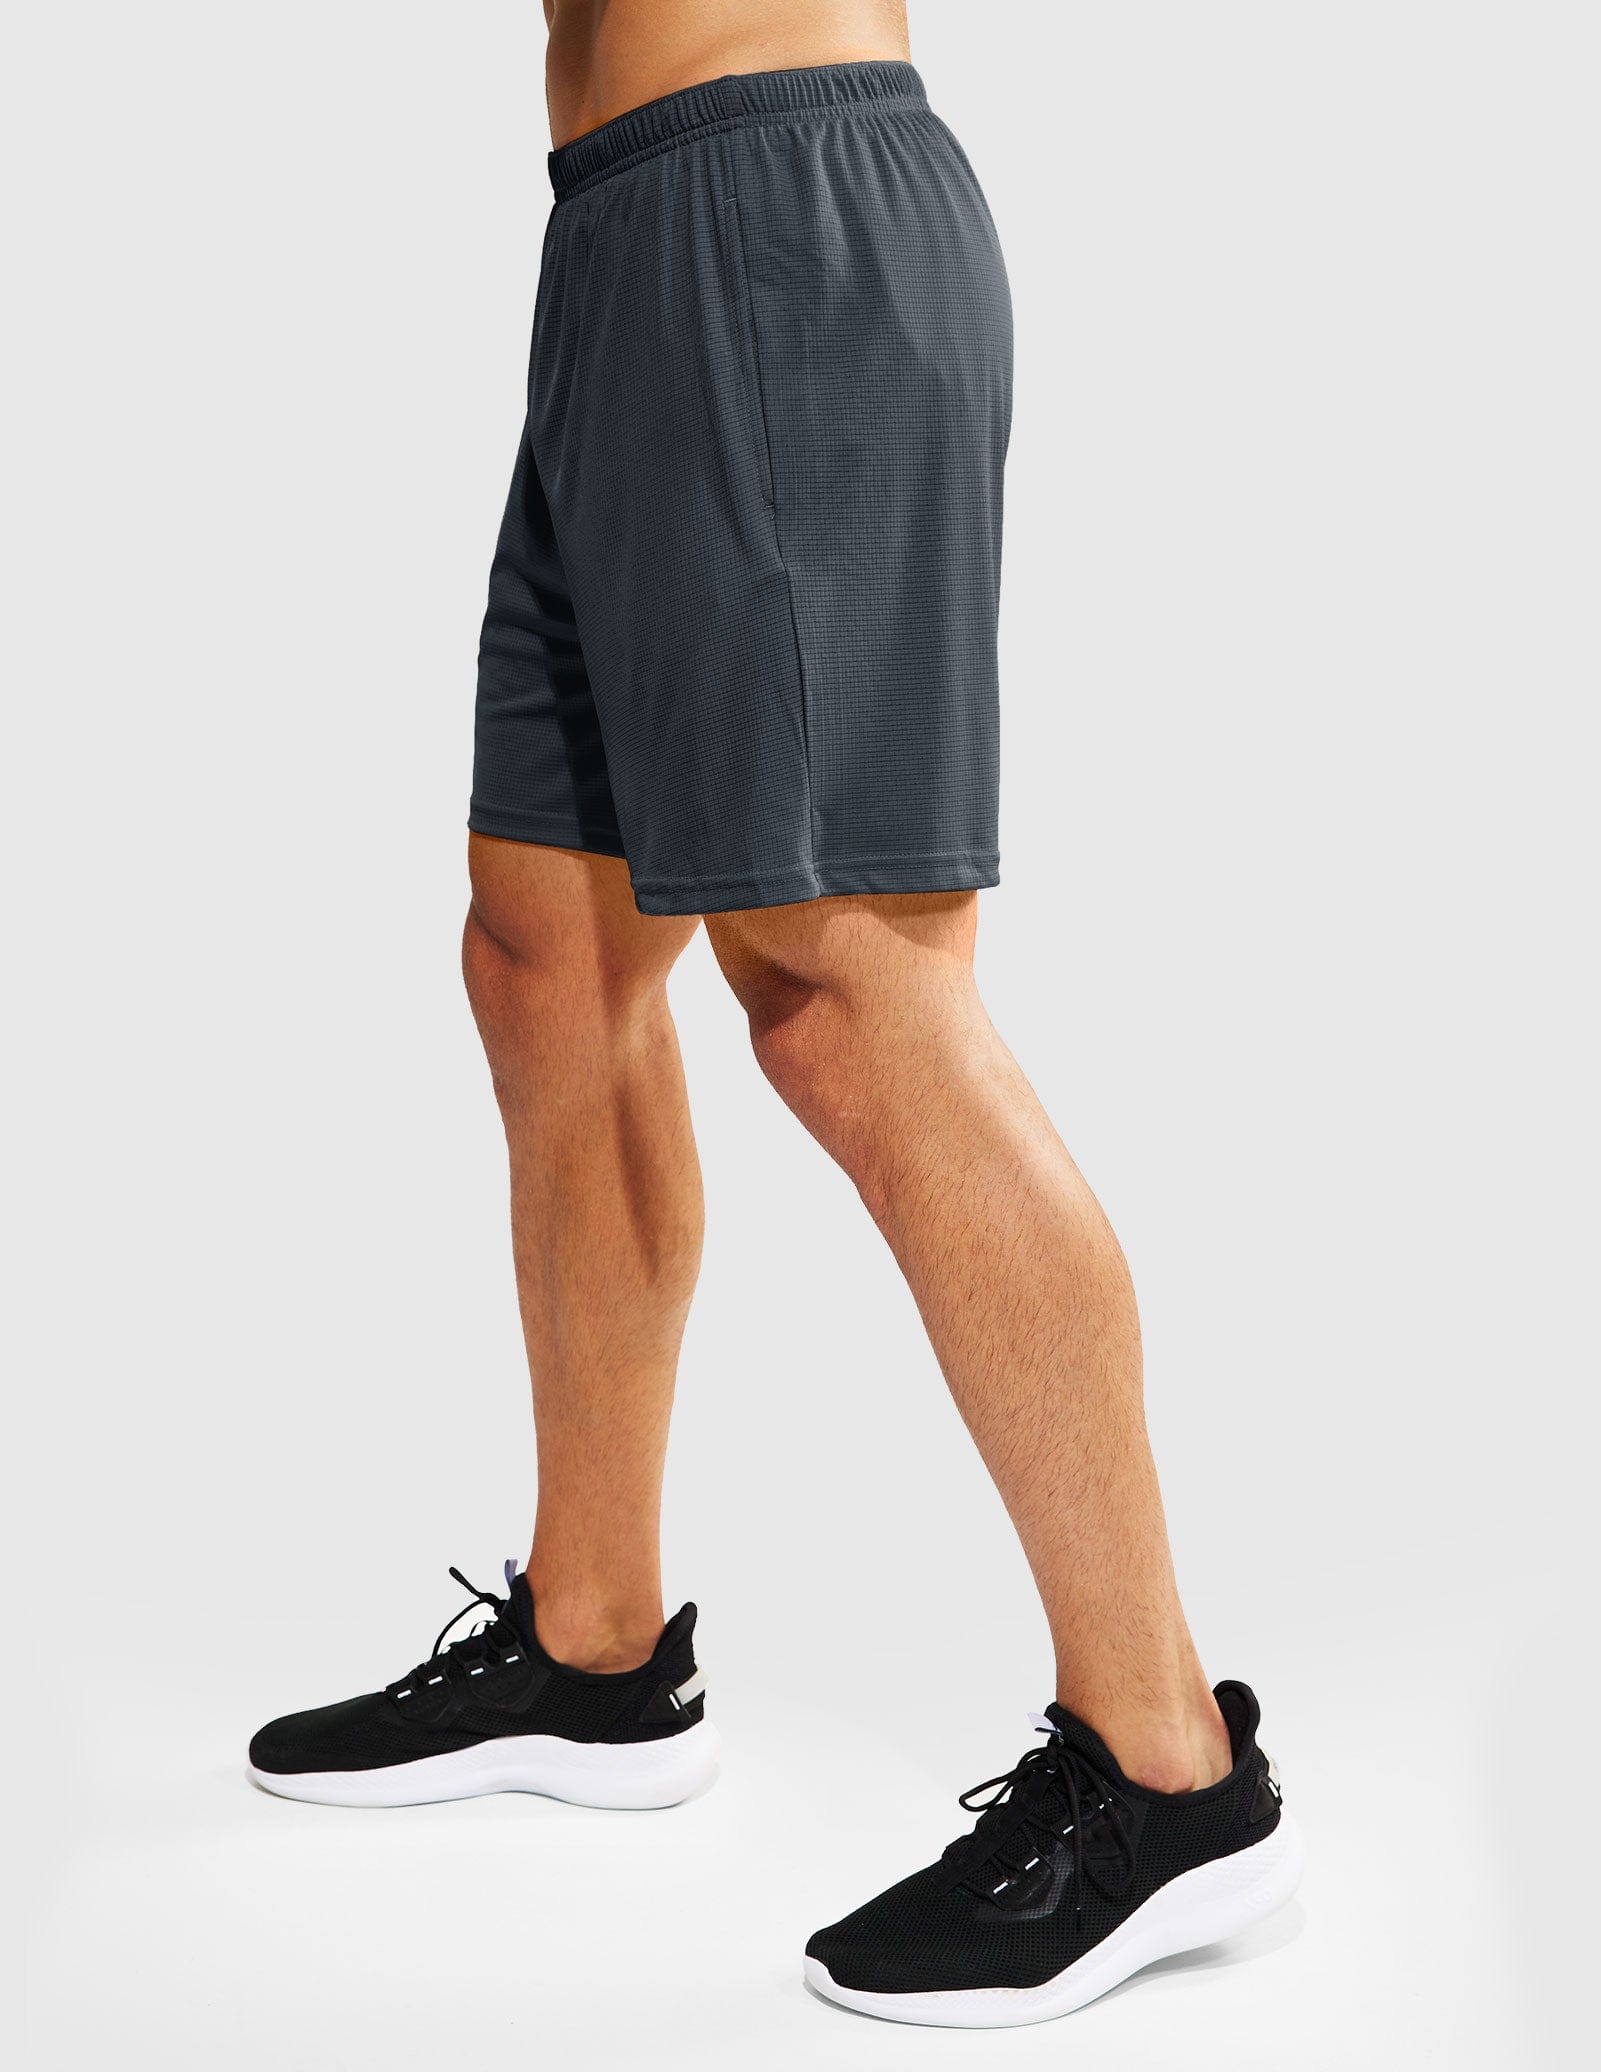 Men's 5-Inch Running Shorts Quick Dry with Pockets & Liner Men's Shorts MIER